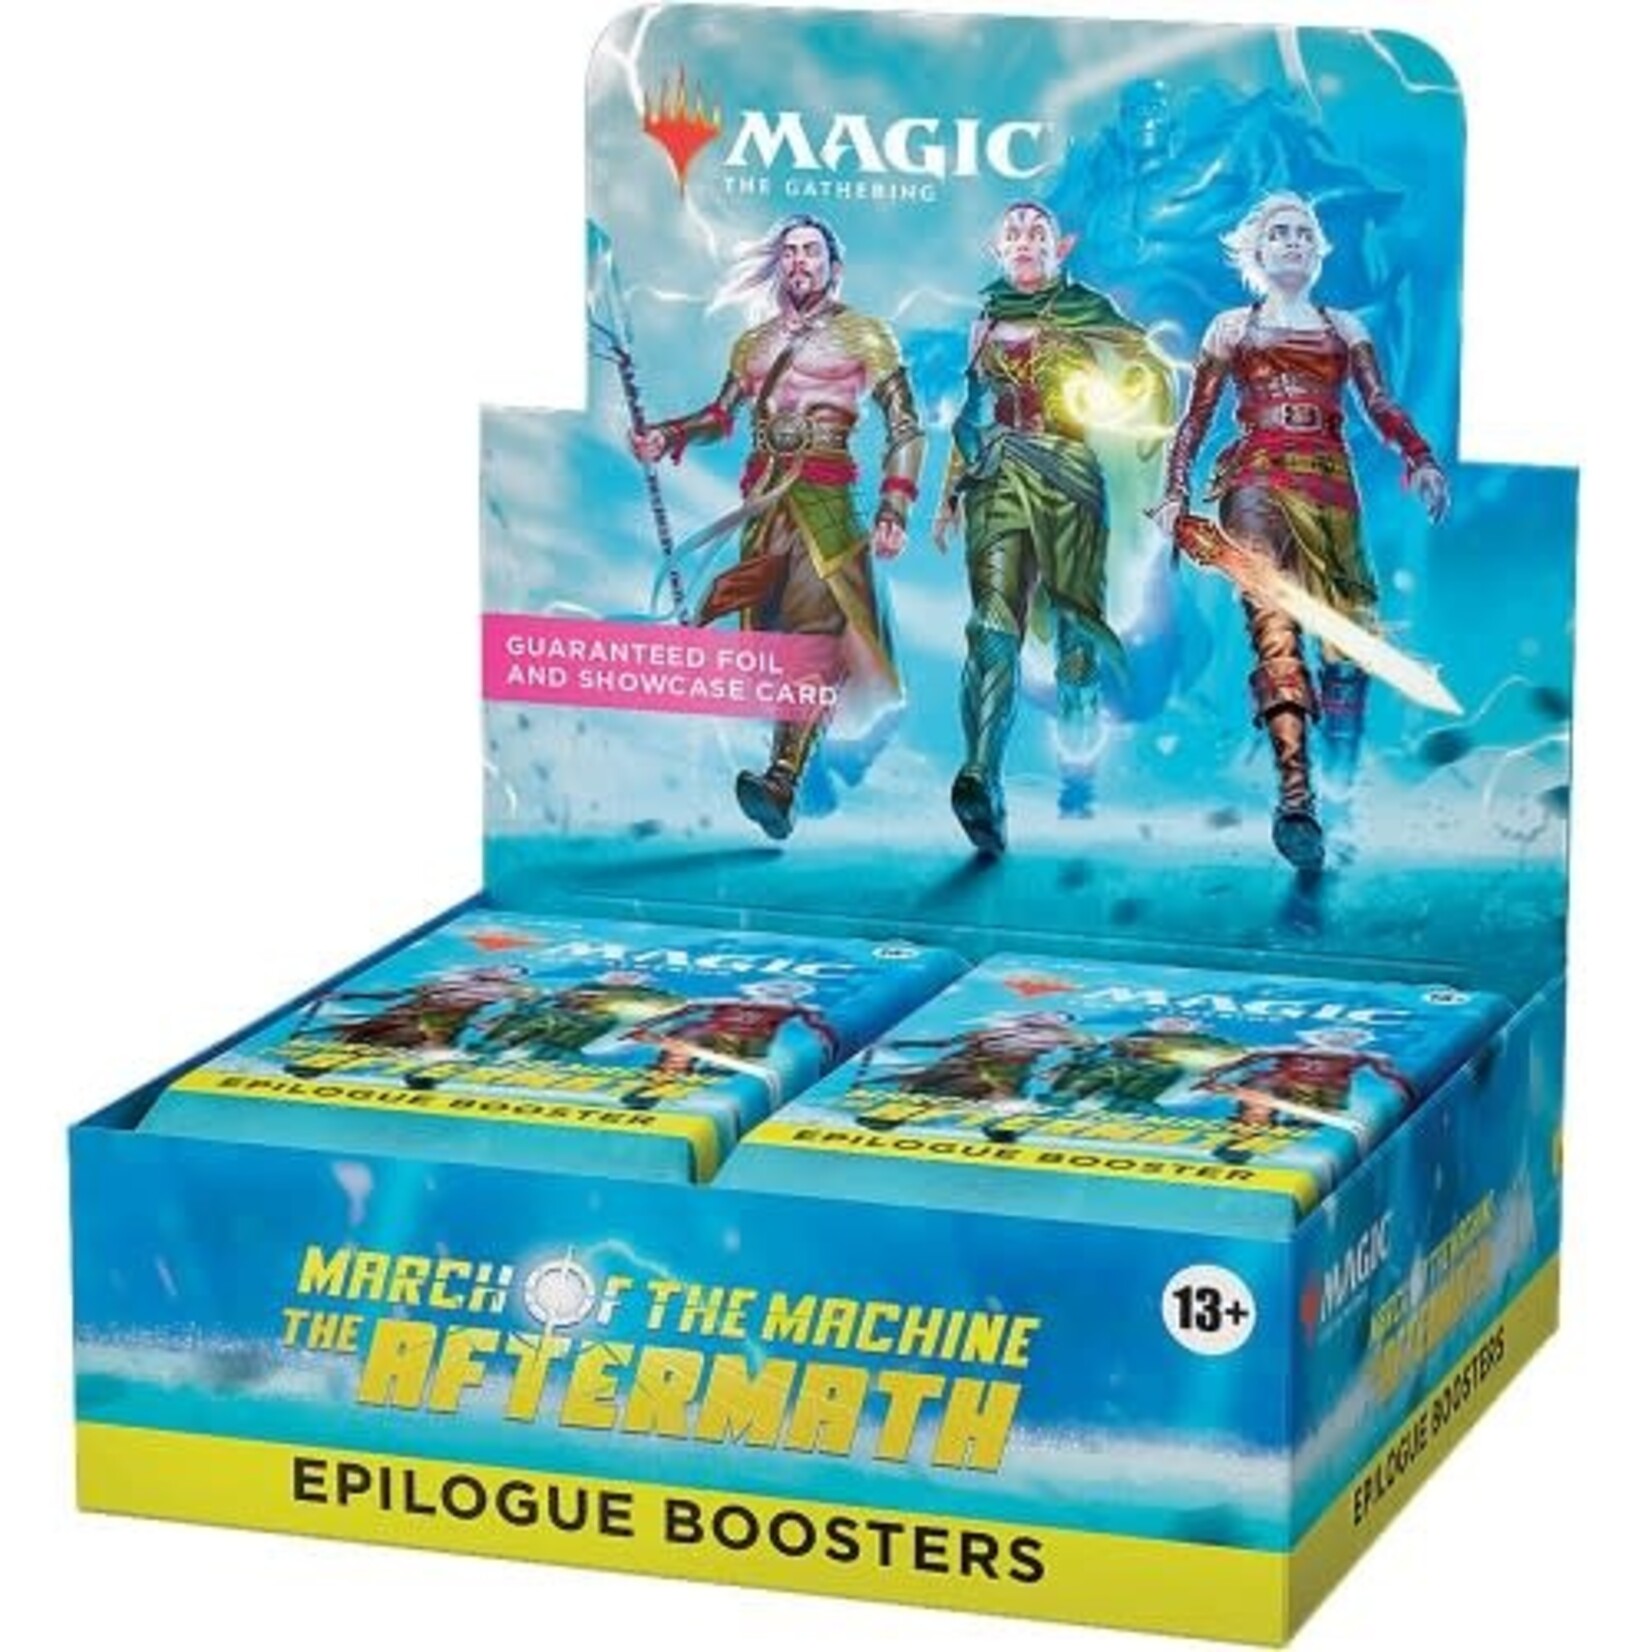 Magic the gathering March of the Machine: Epilogue Booster